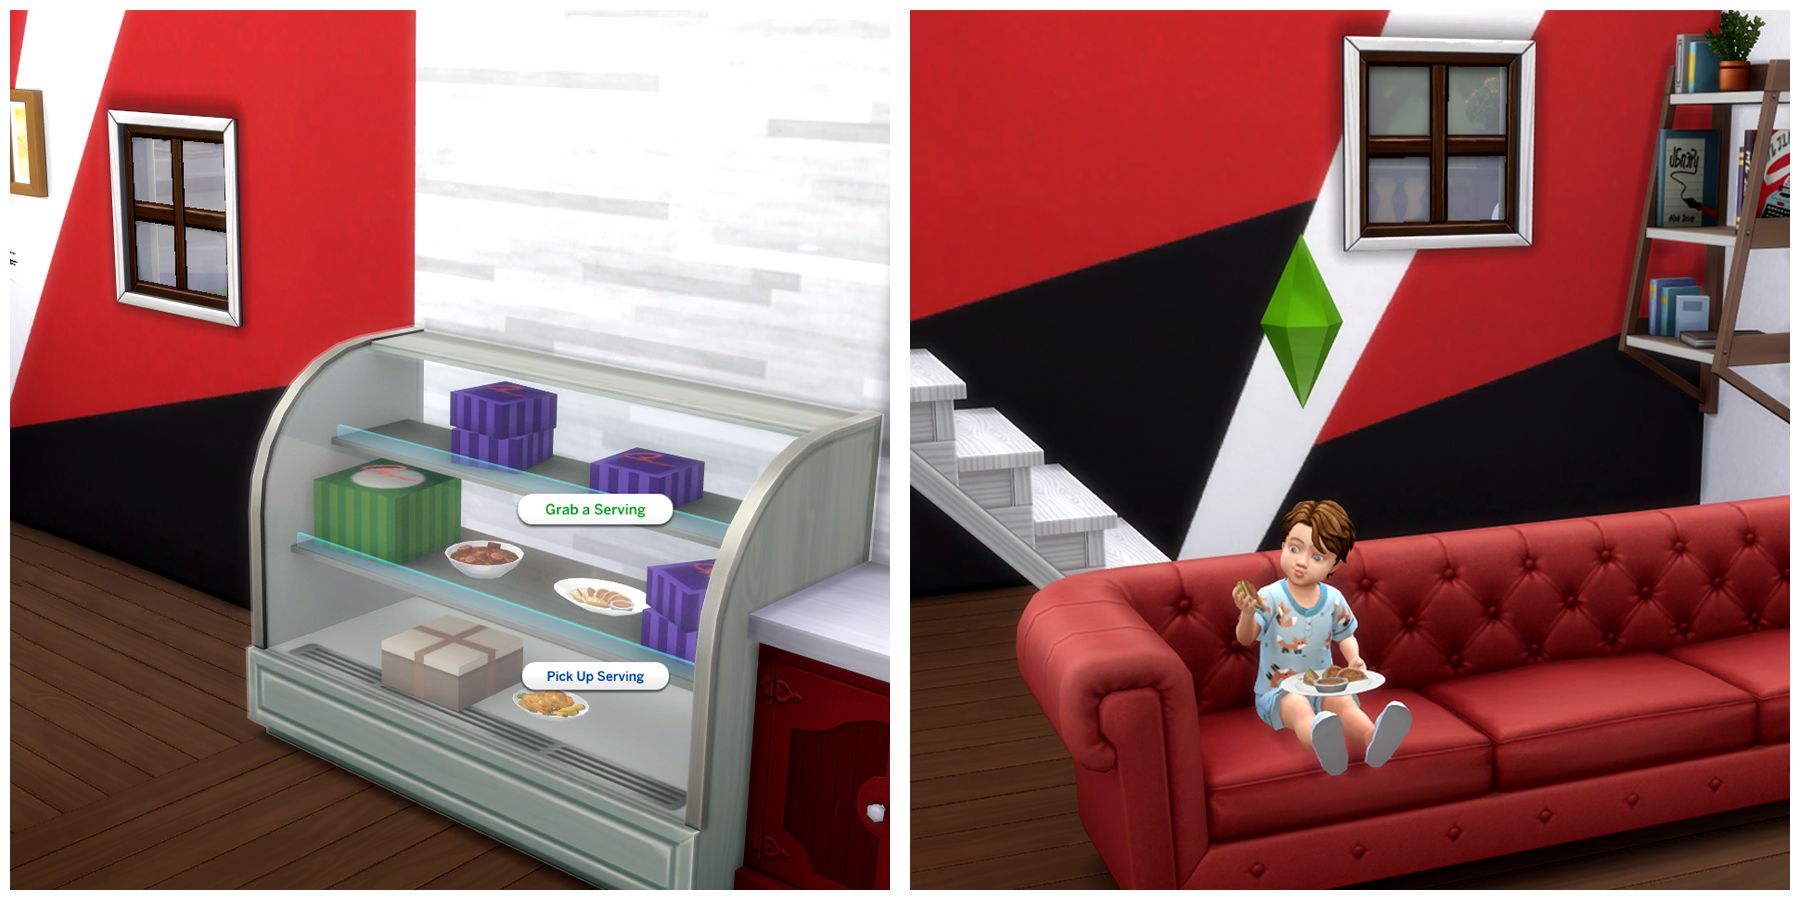 the fridge display in the sims 4